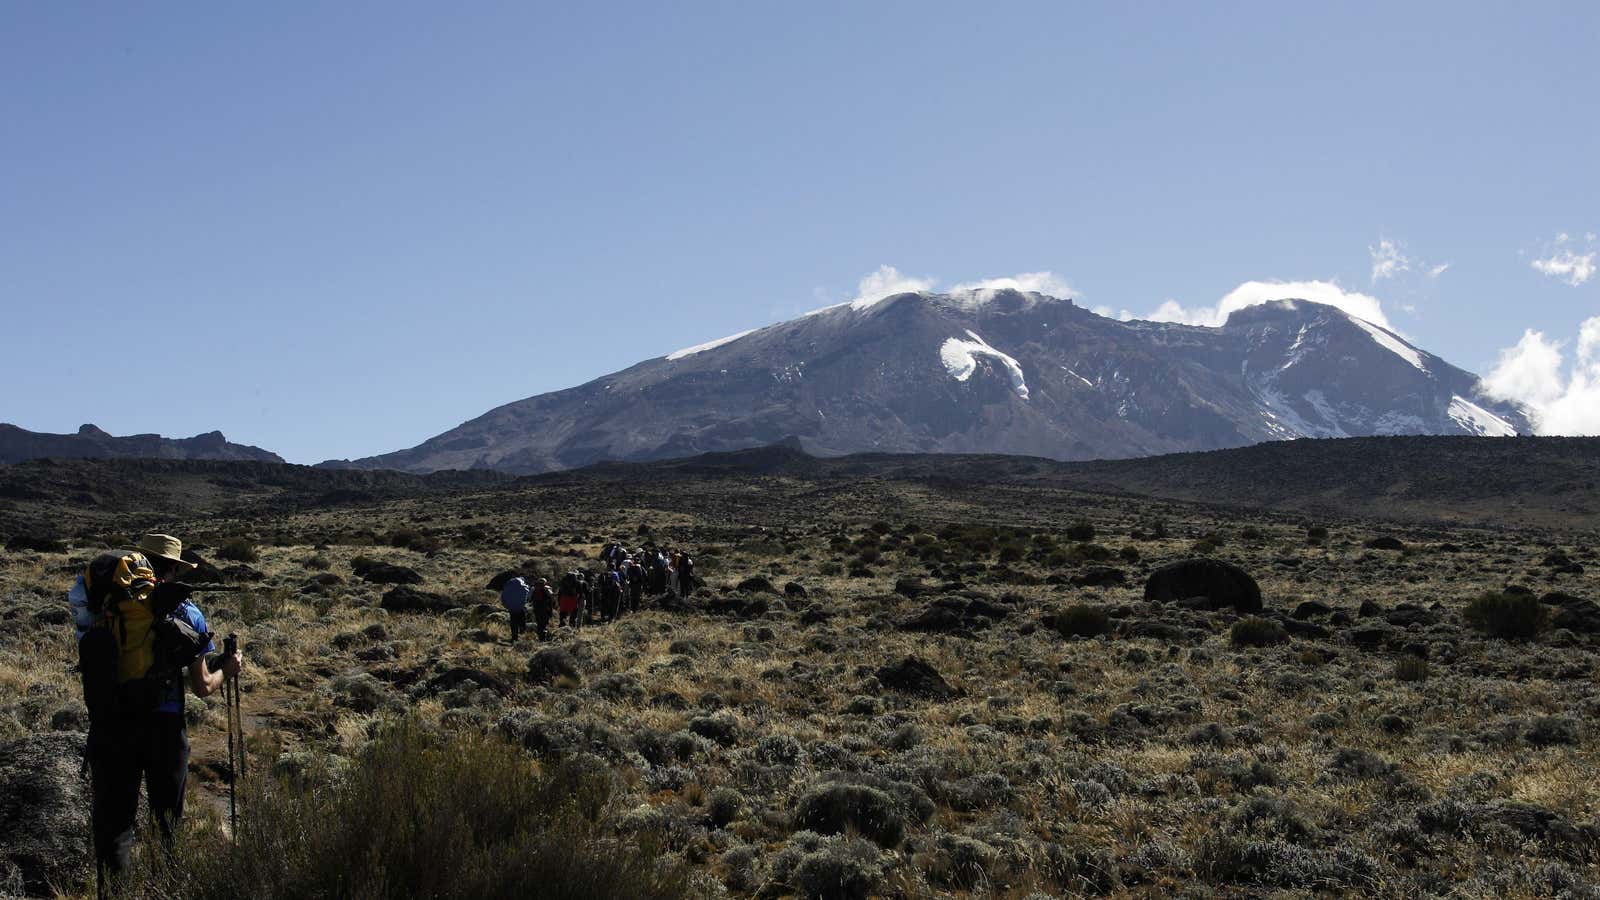 Shira Plateau on Mount Kilimanjaro, one of the world’s largest volcanoes in Tanzania